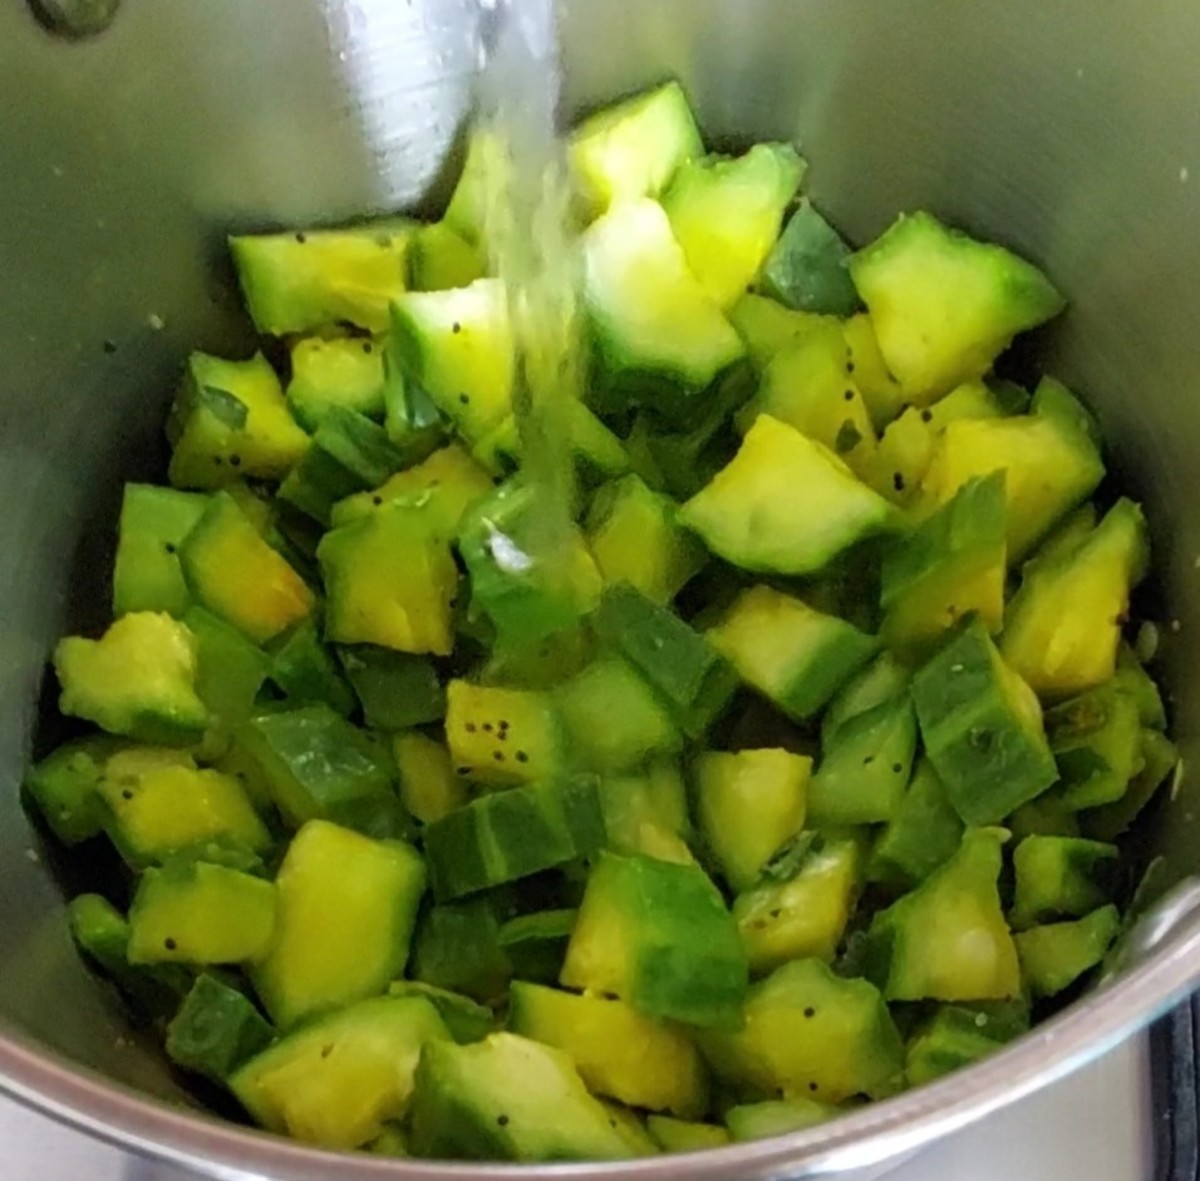 Add 1/2 cup of water, close the lid and cook till the ridge gourd is cooked well.